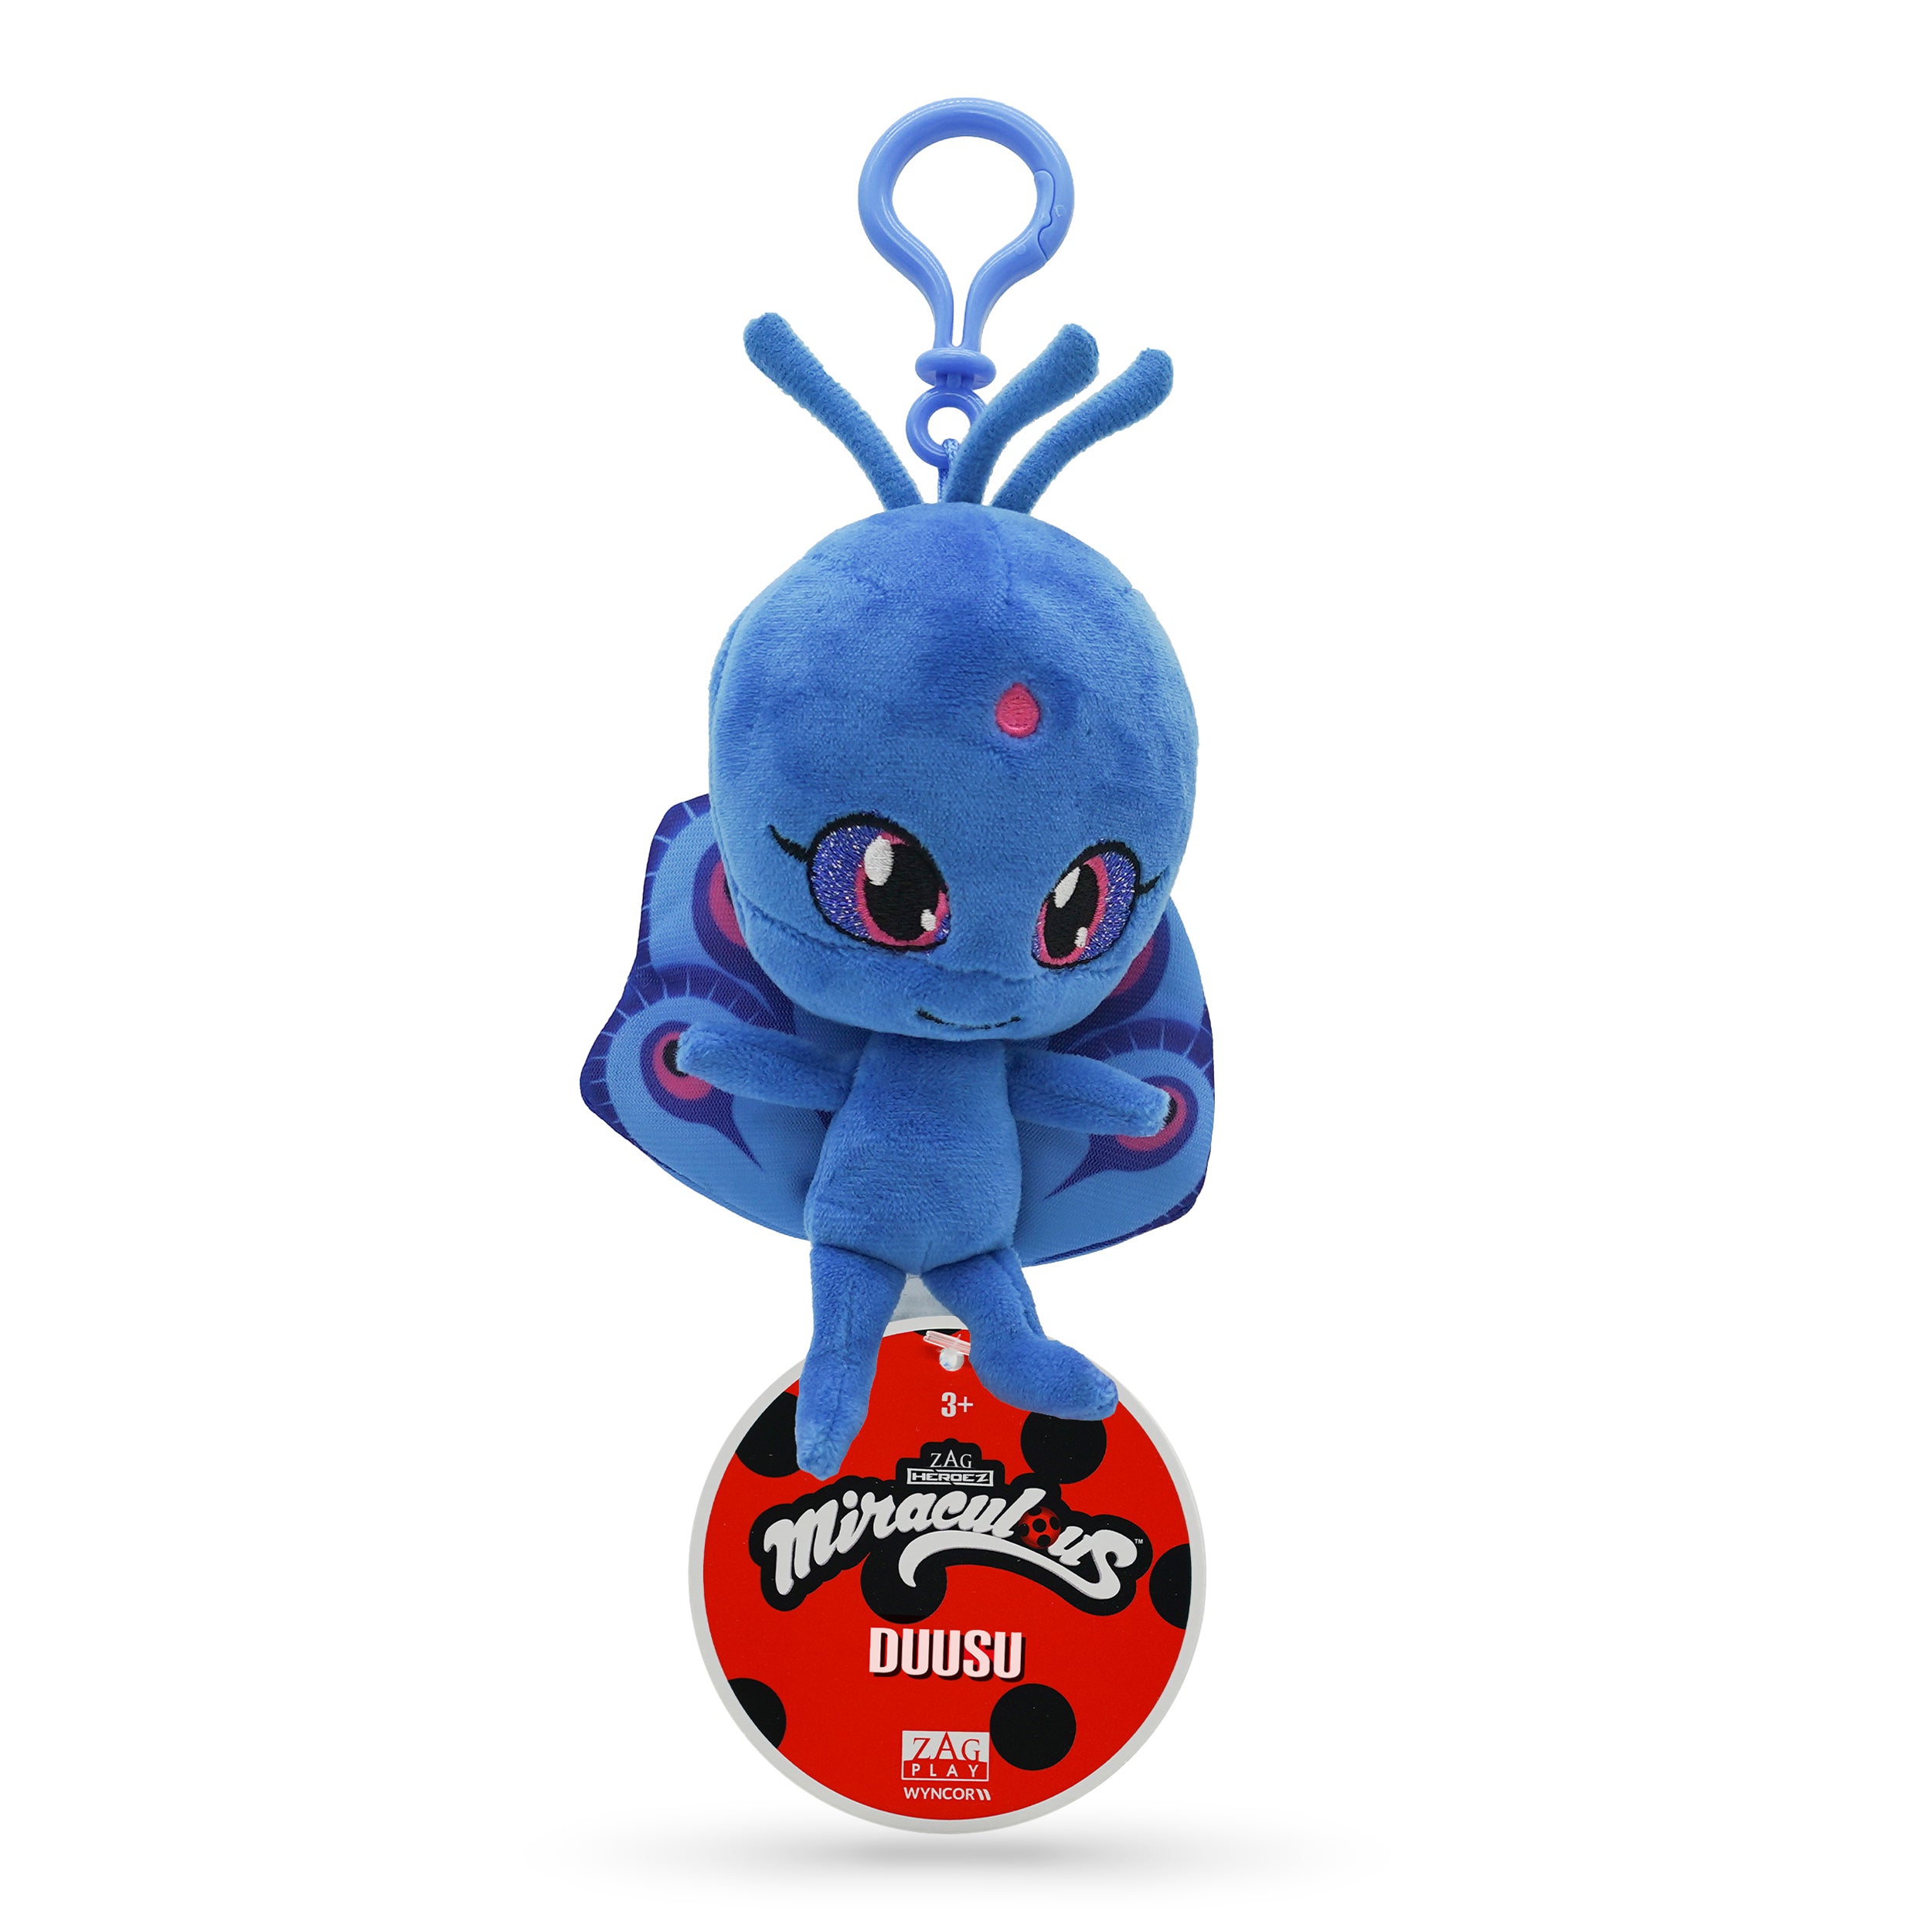 Miraculous Ladybug - Kwami Lifesize 5-Inch Plush Clip-On Toy, Super Soft Collectible with Glitter Stitch Eyes and Matching Backpack Keychain, Duusu